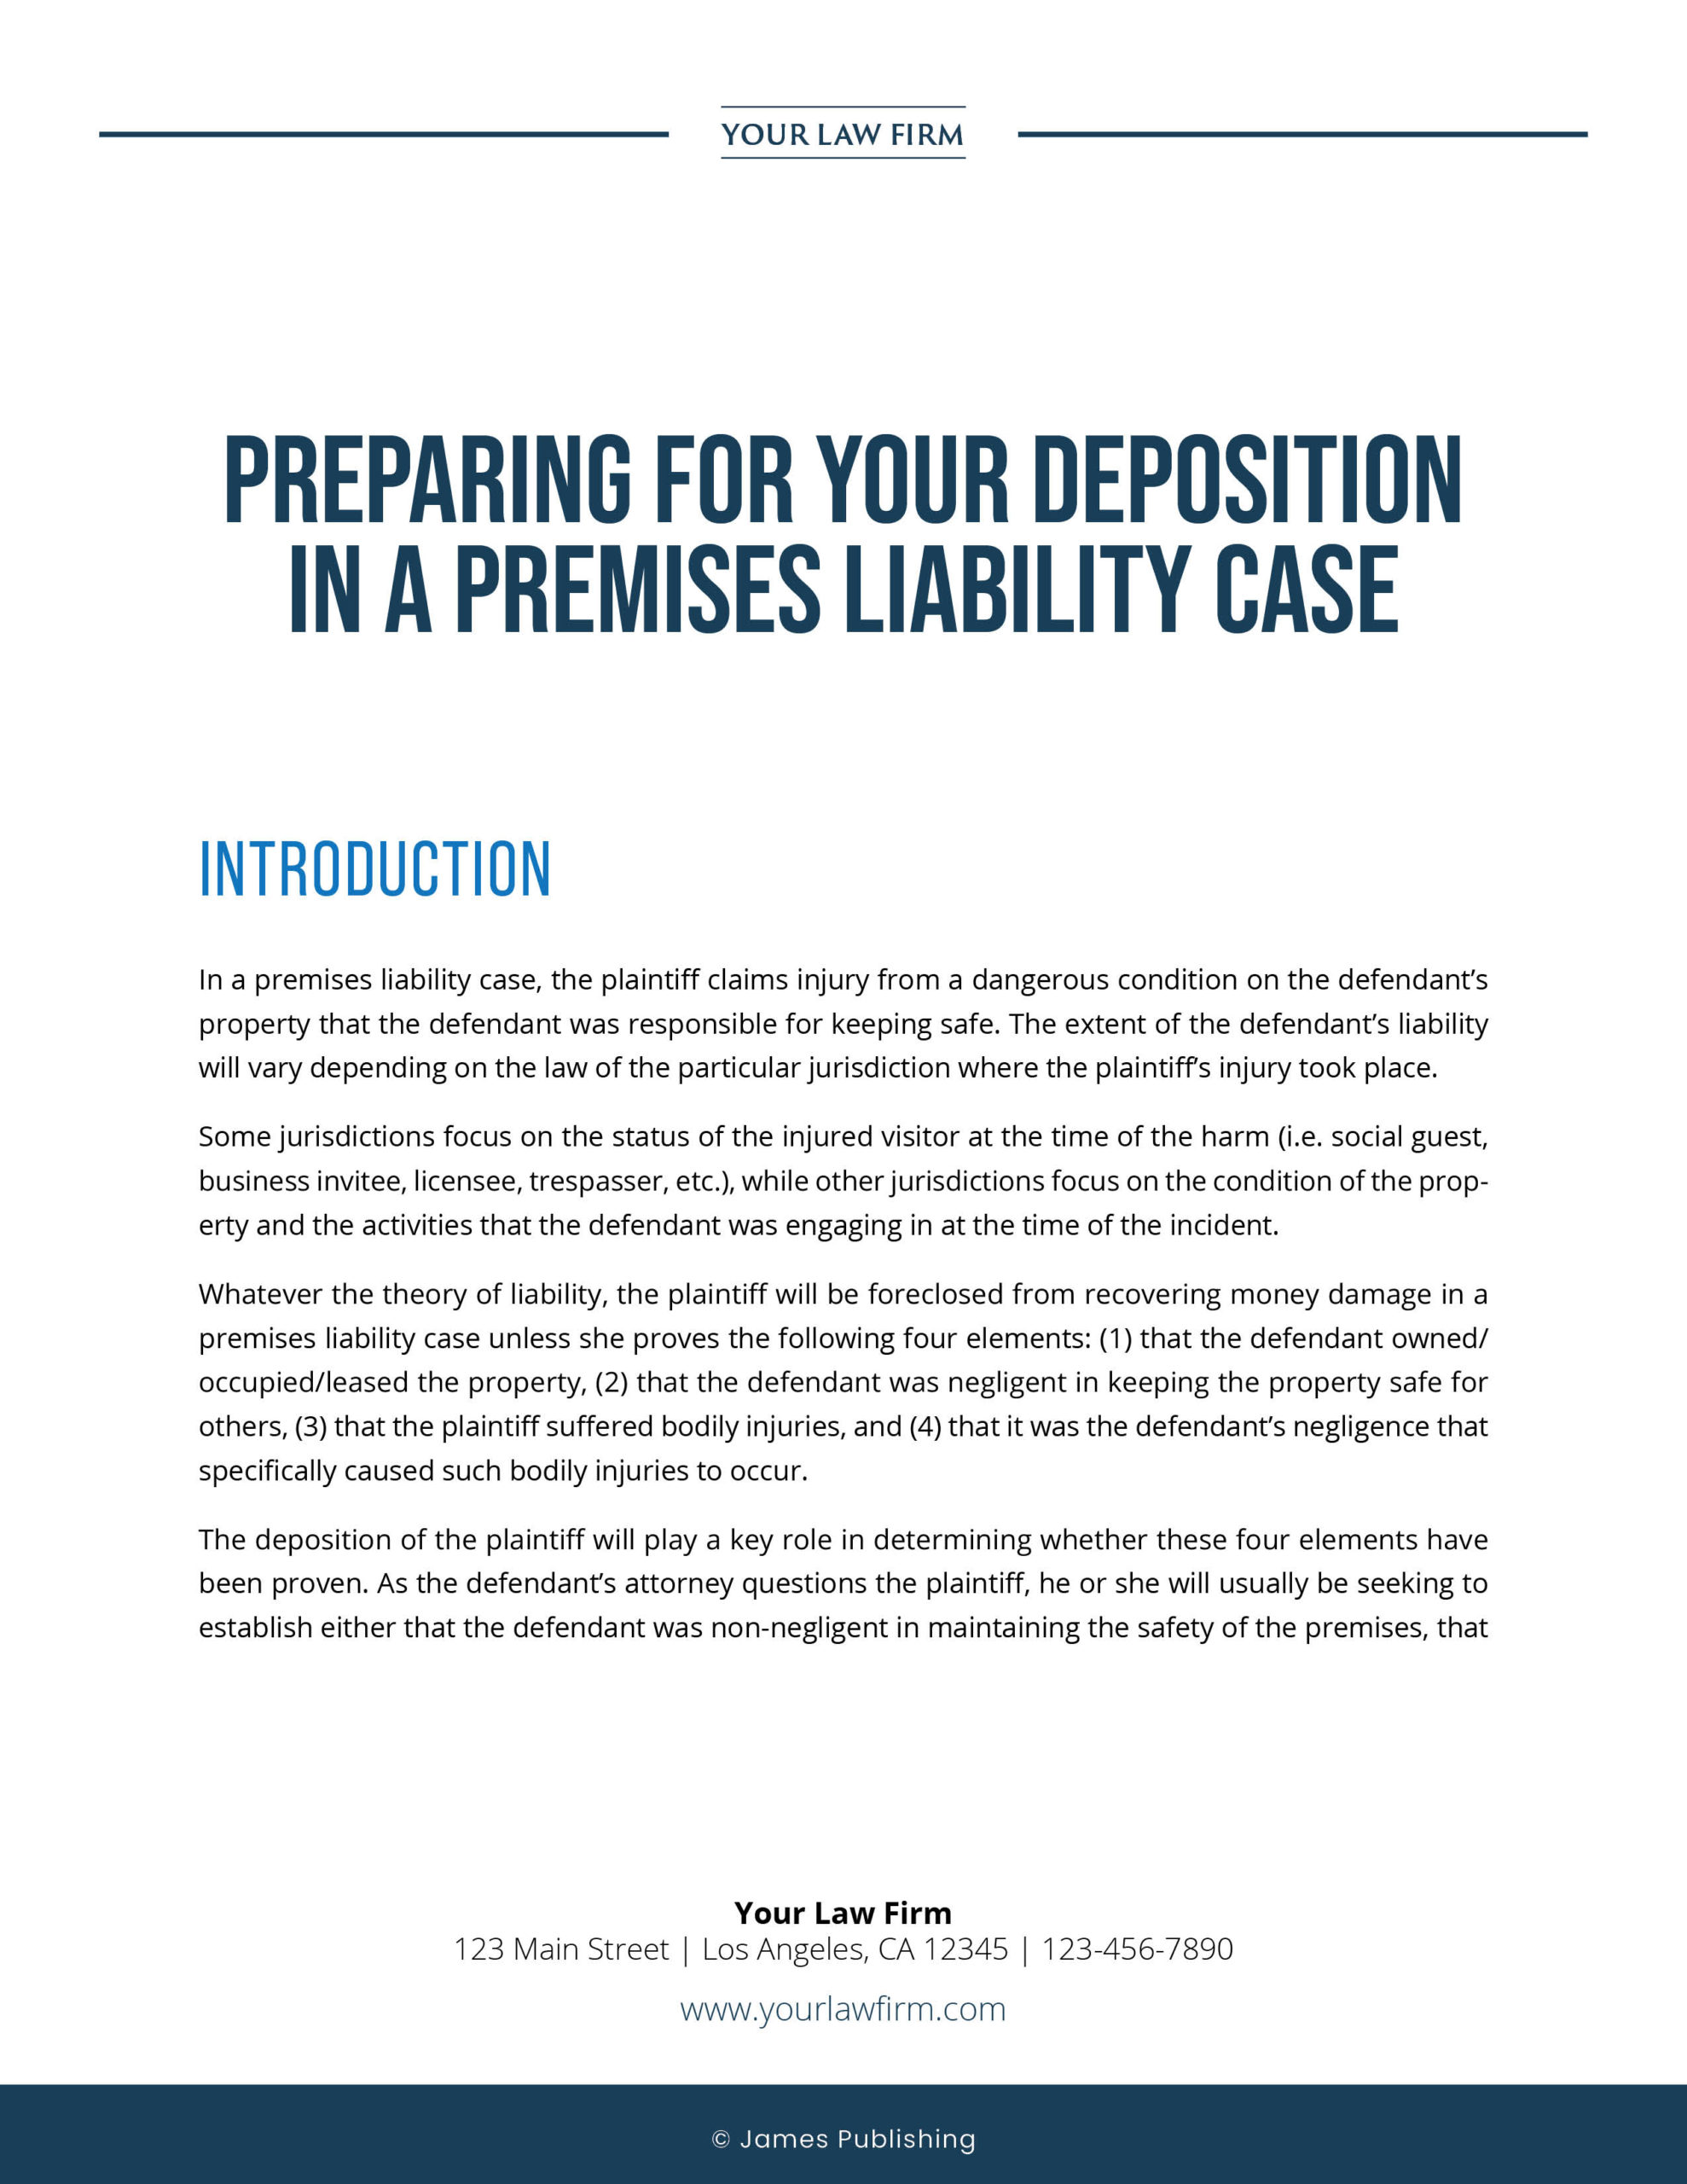 PI-24 Preparing for Your Deposition in a Premises Liability Case